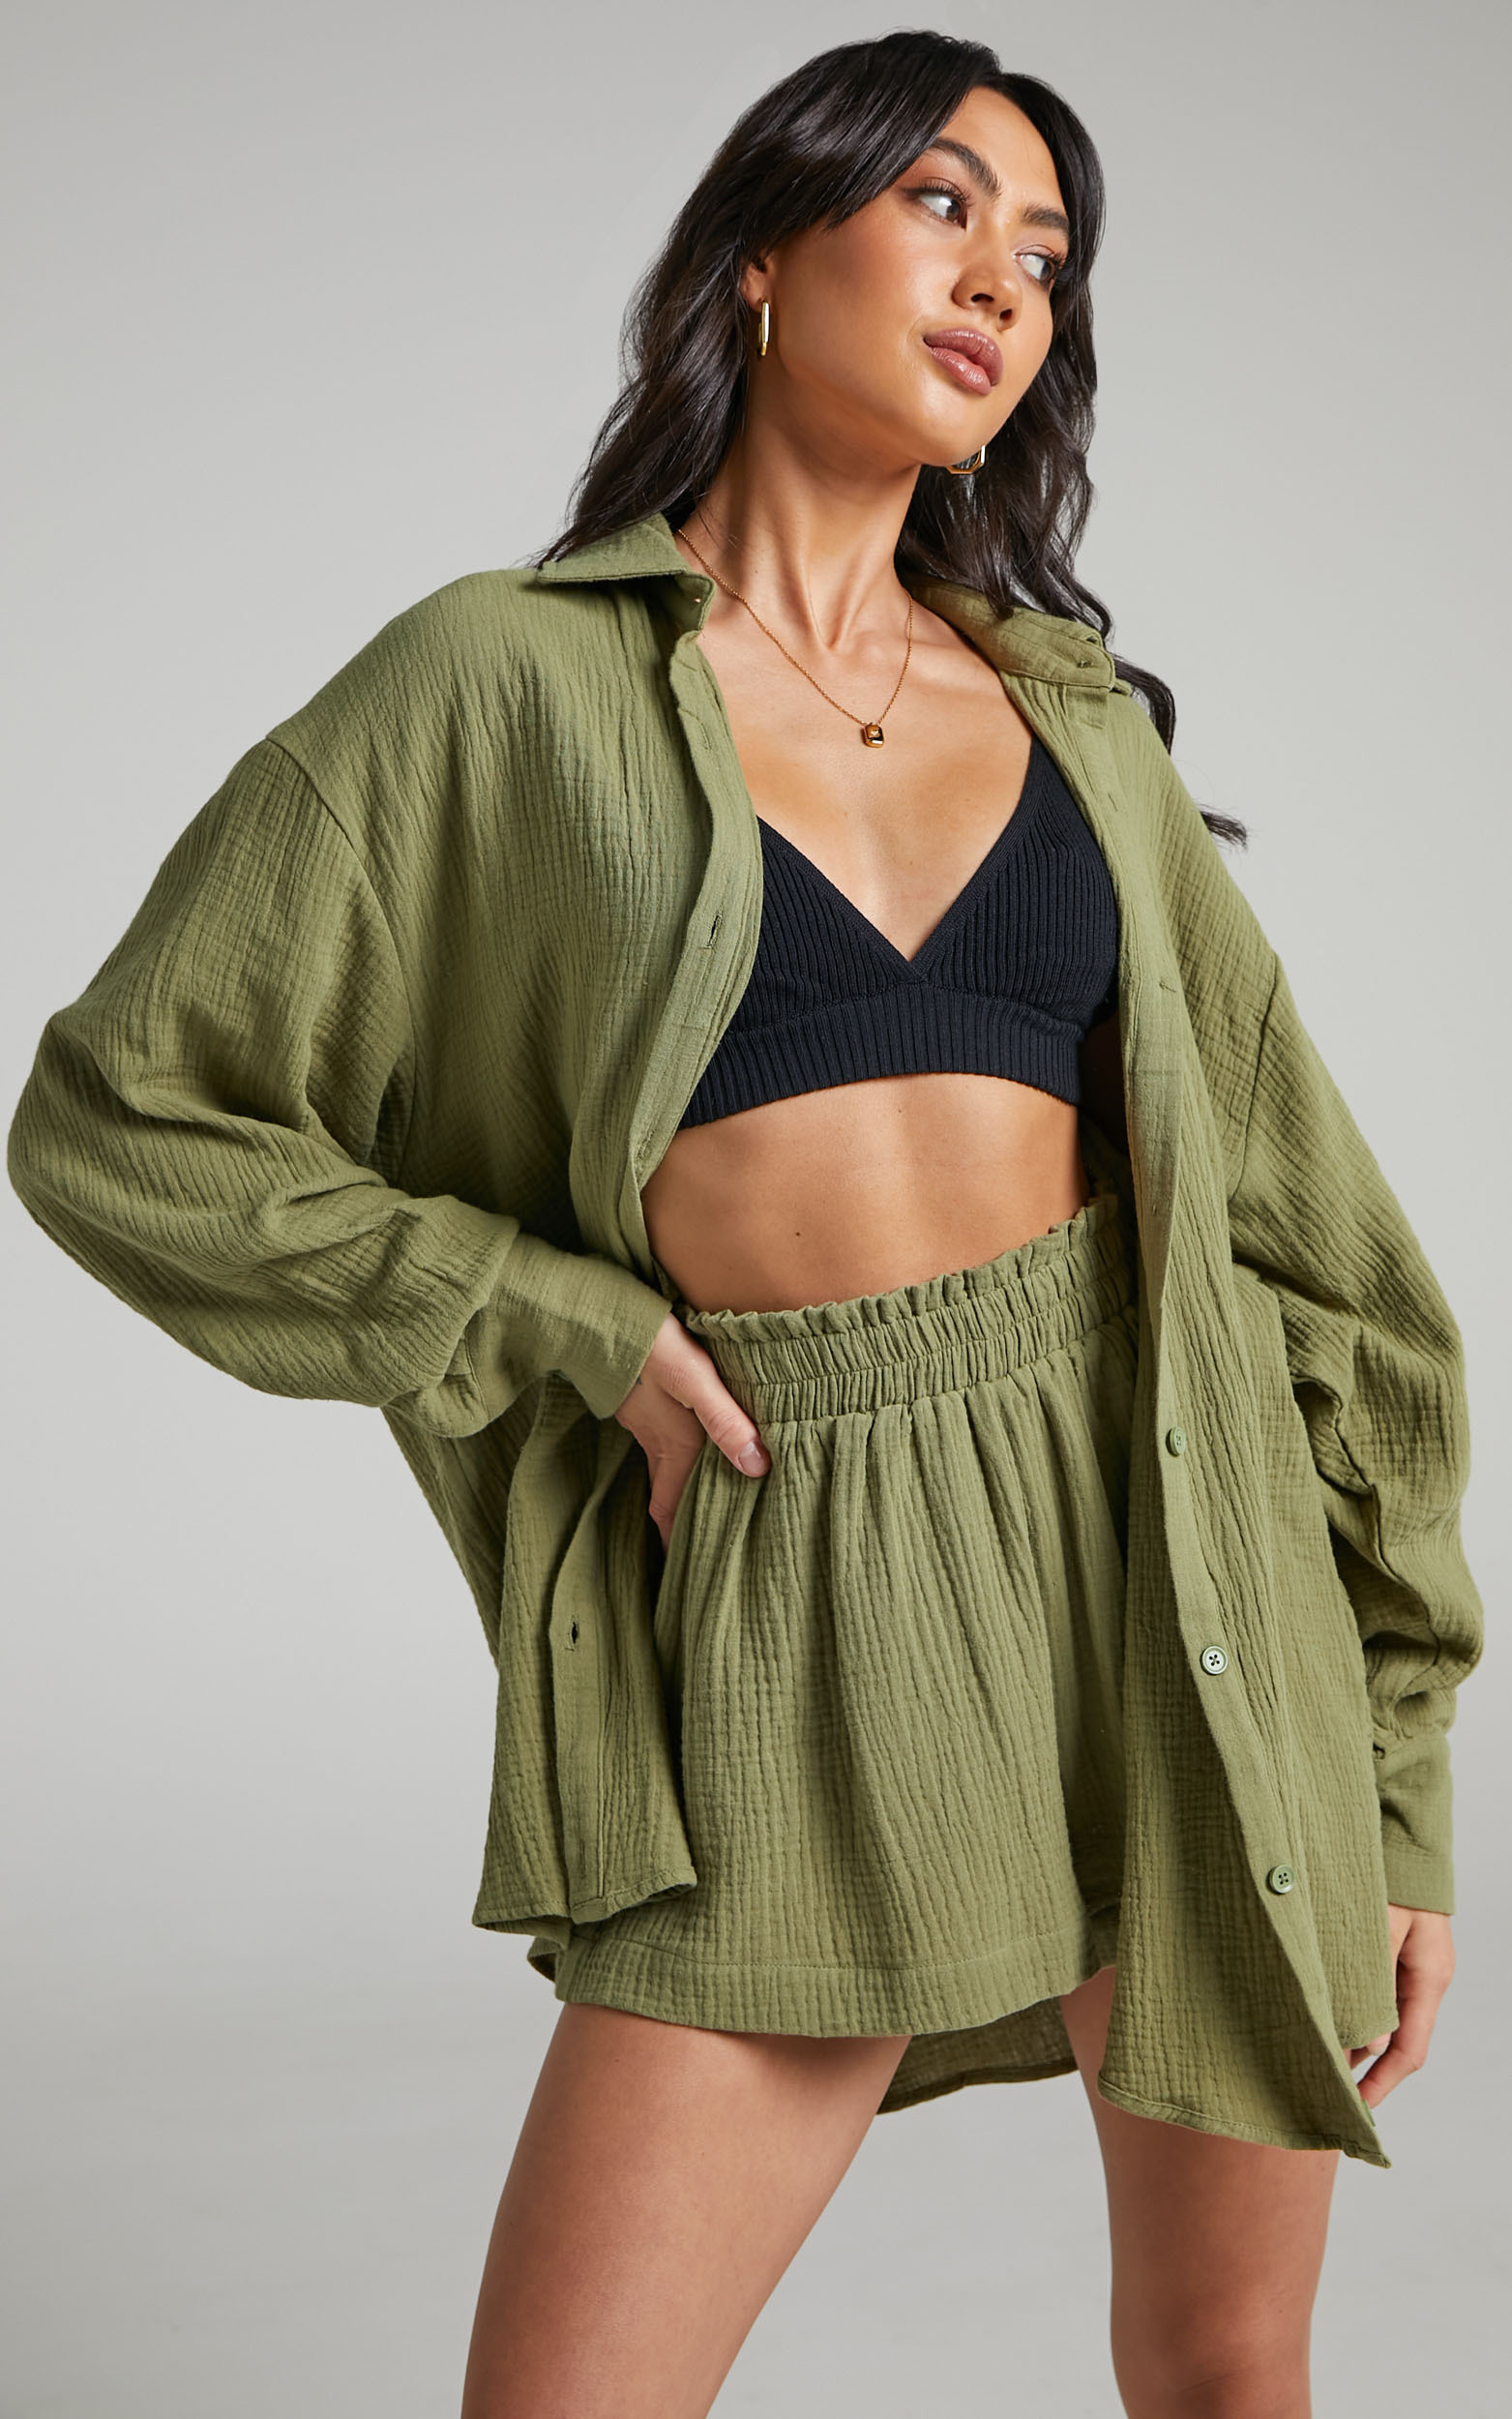 Yvaine Oversized Long Sleeve Button Up Shirt in Khaki - 06, GRN1, hi-res image number null